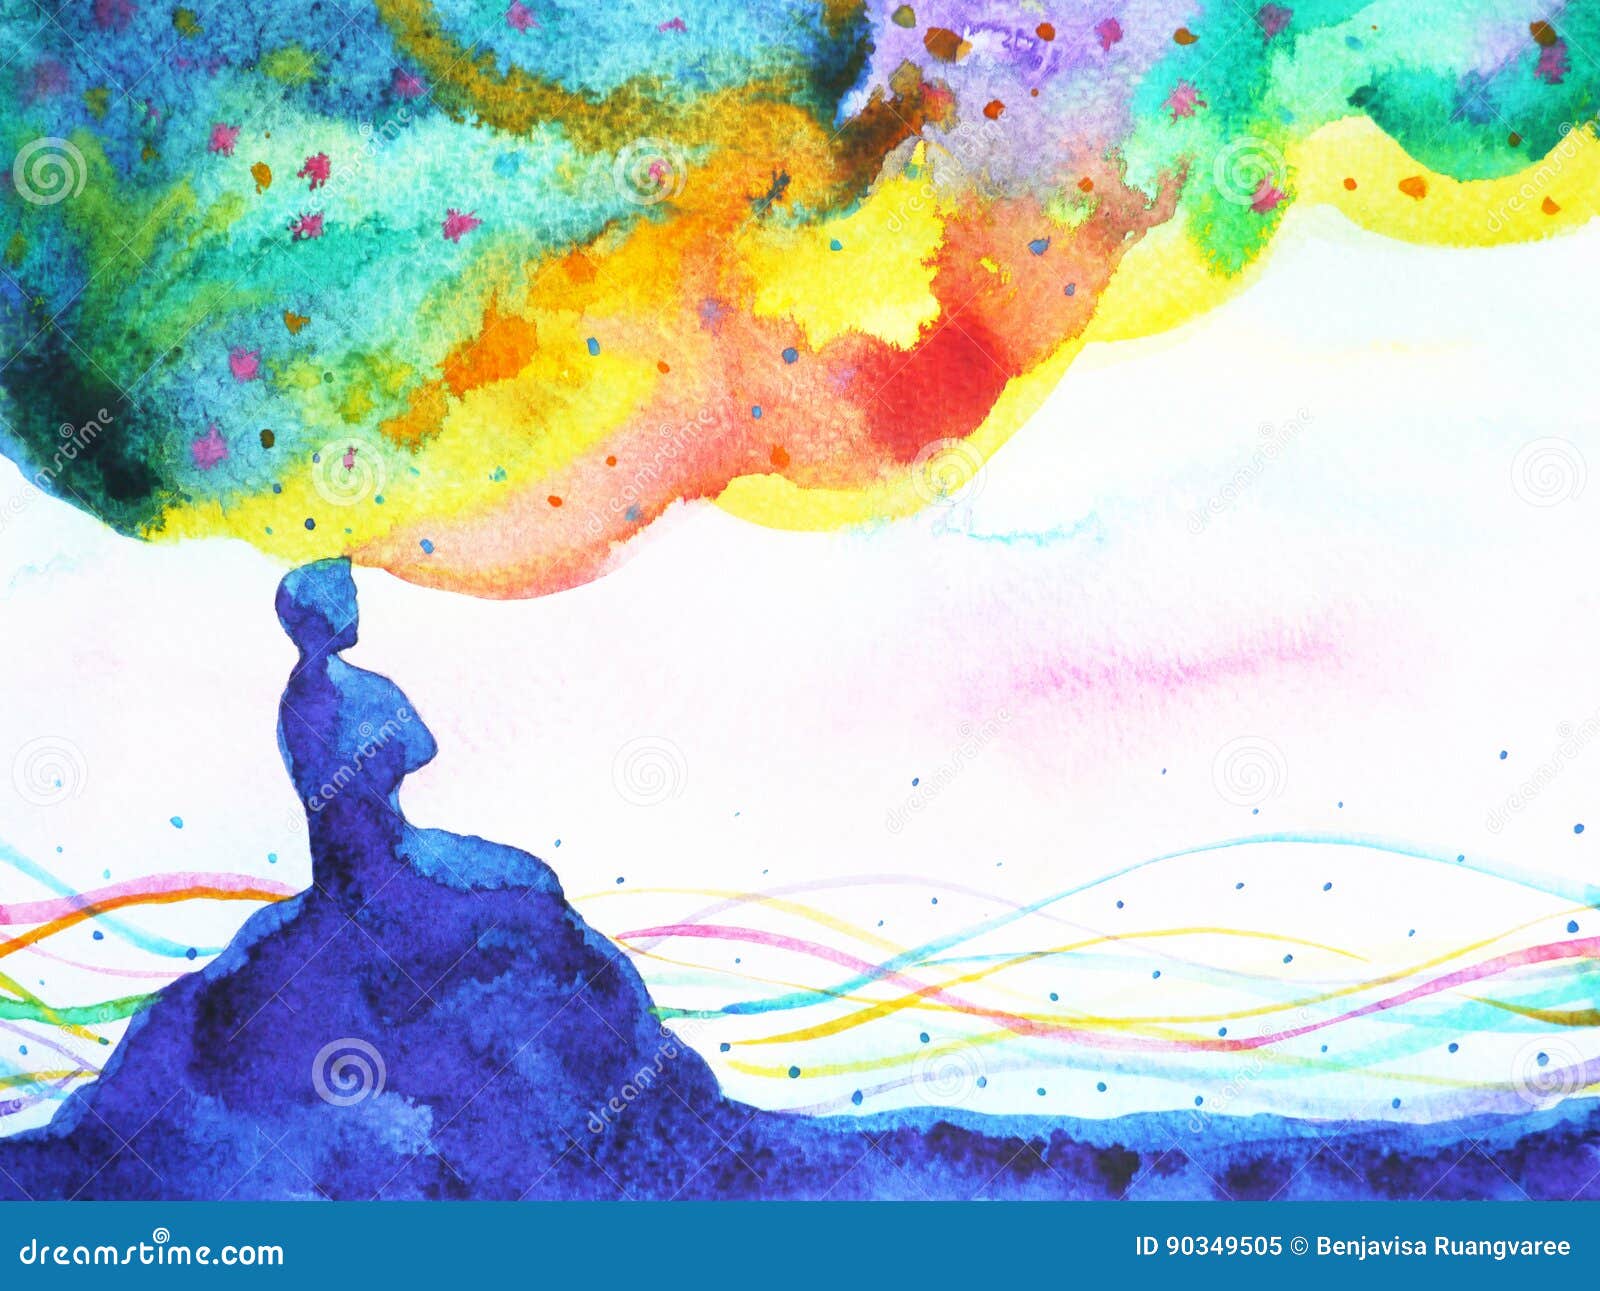 power of thinking, abstract imagination, world, universe inside your mind watercolor painting